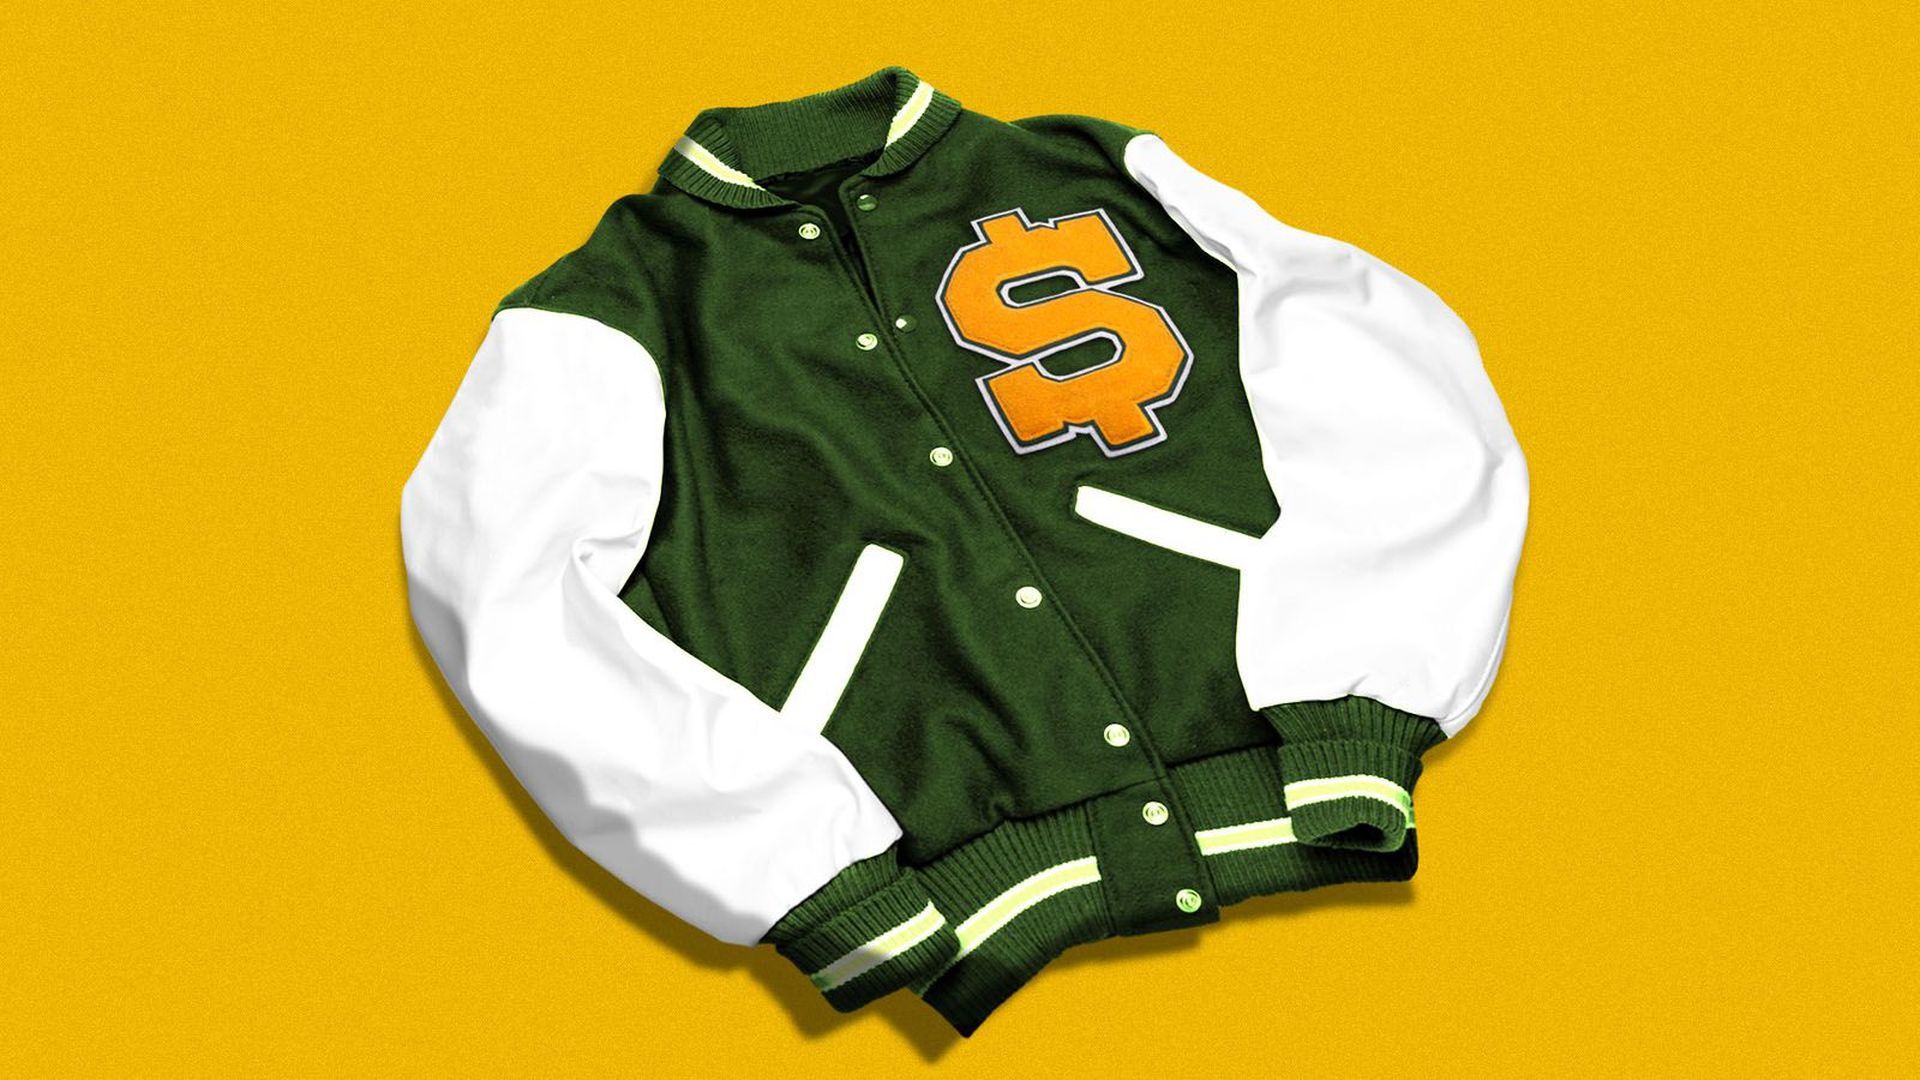 A letterman jacket with a money sign on it